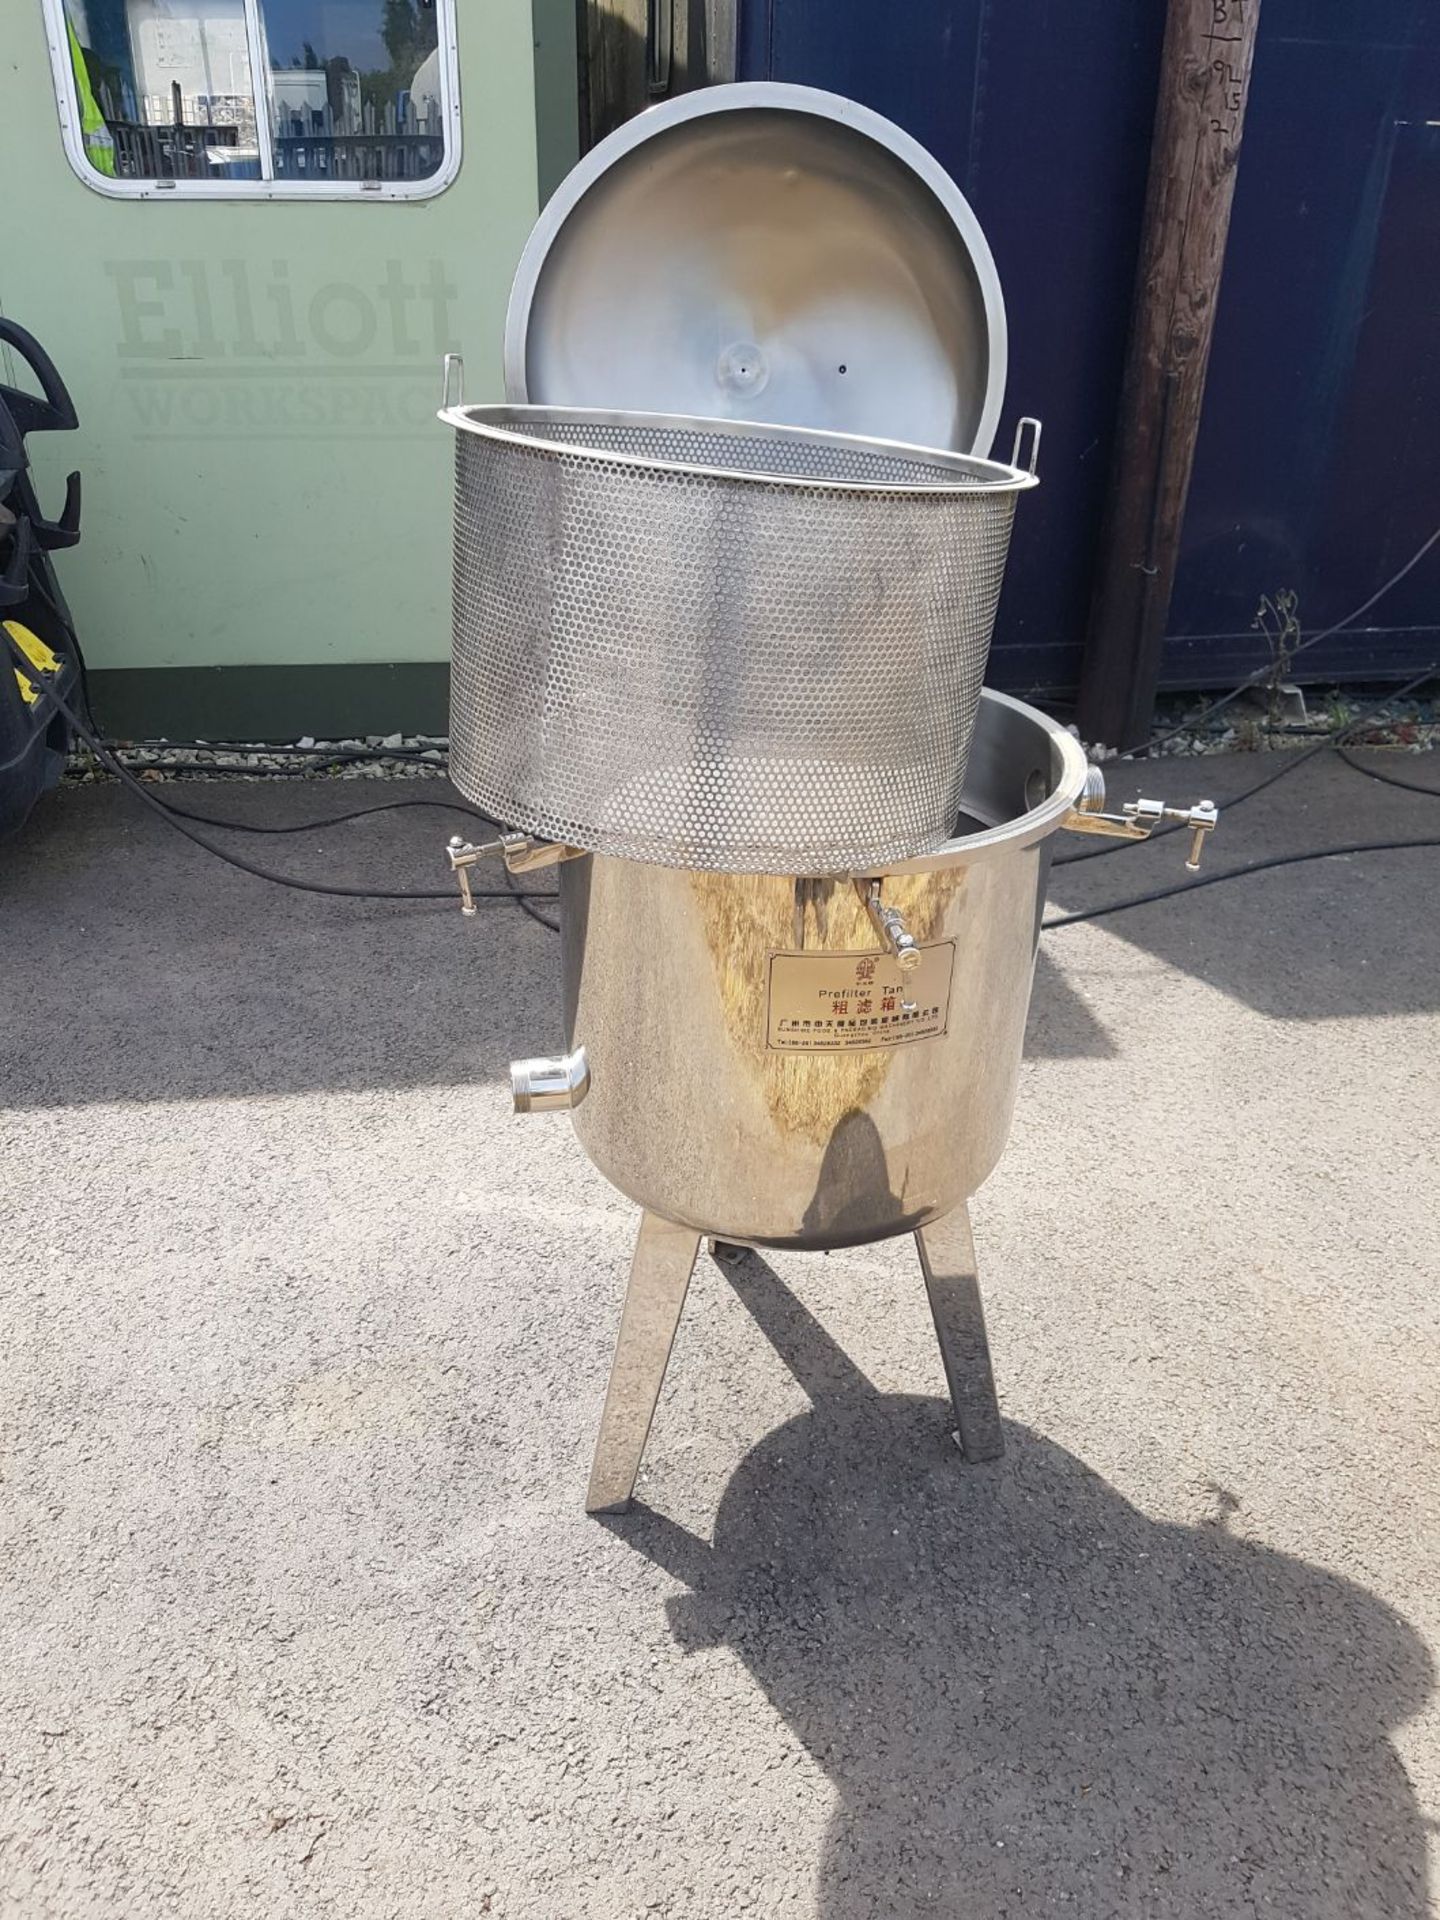 1 x brand new resin impregnation stainless steel tank vacuum tank with basket filter support - Image 7 of 7